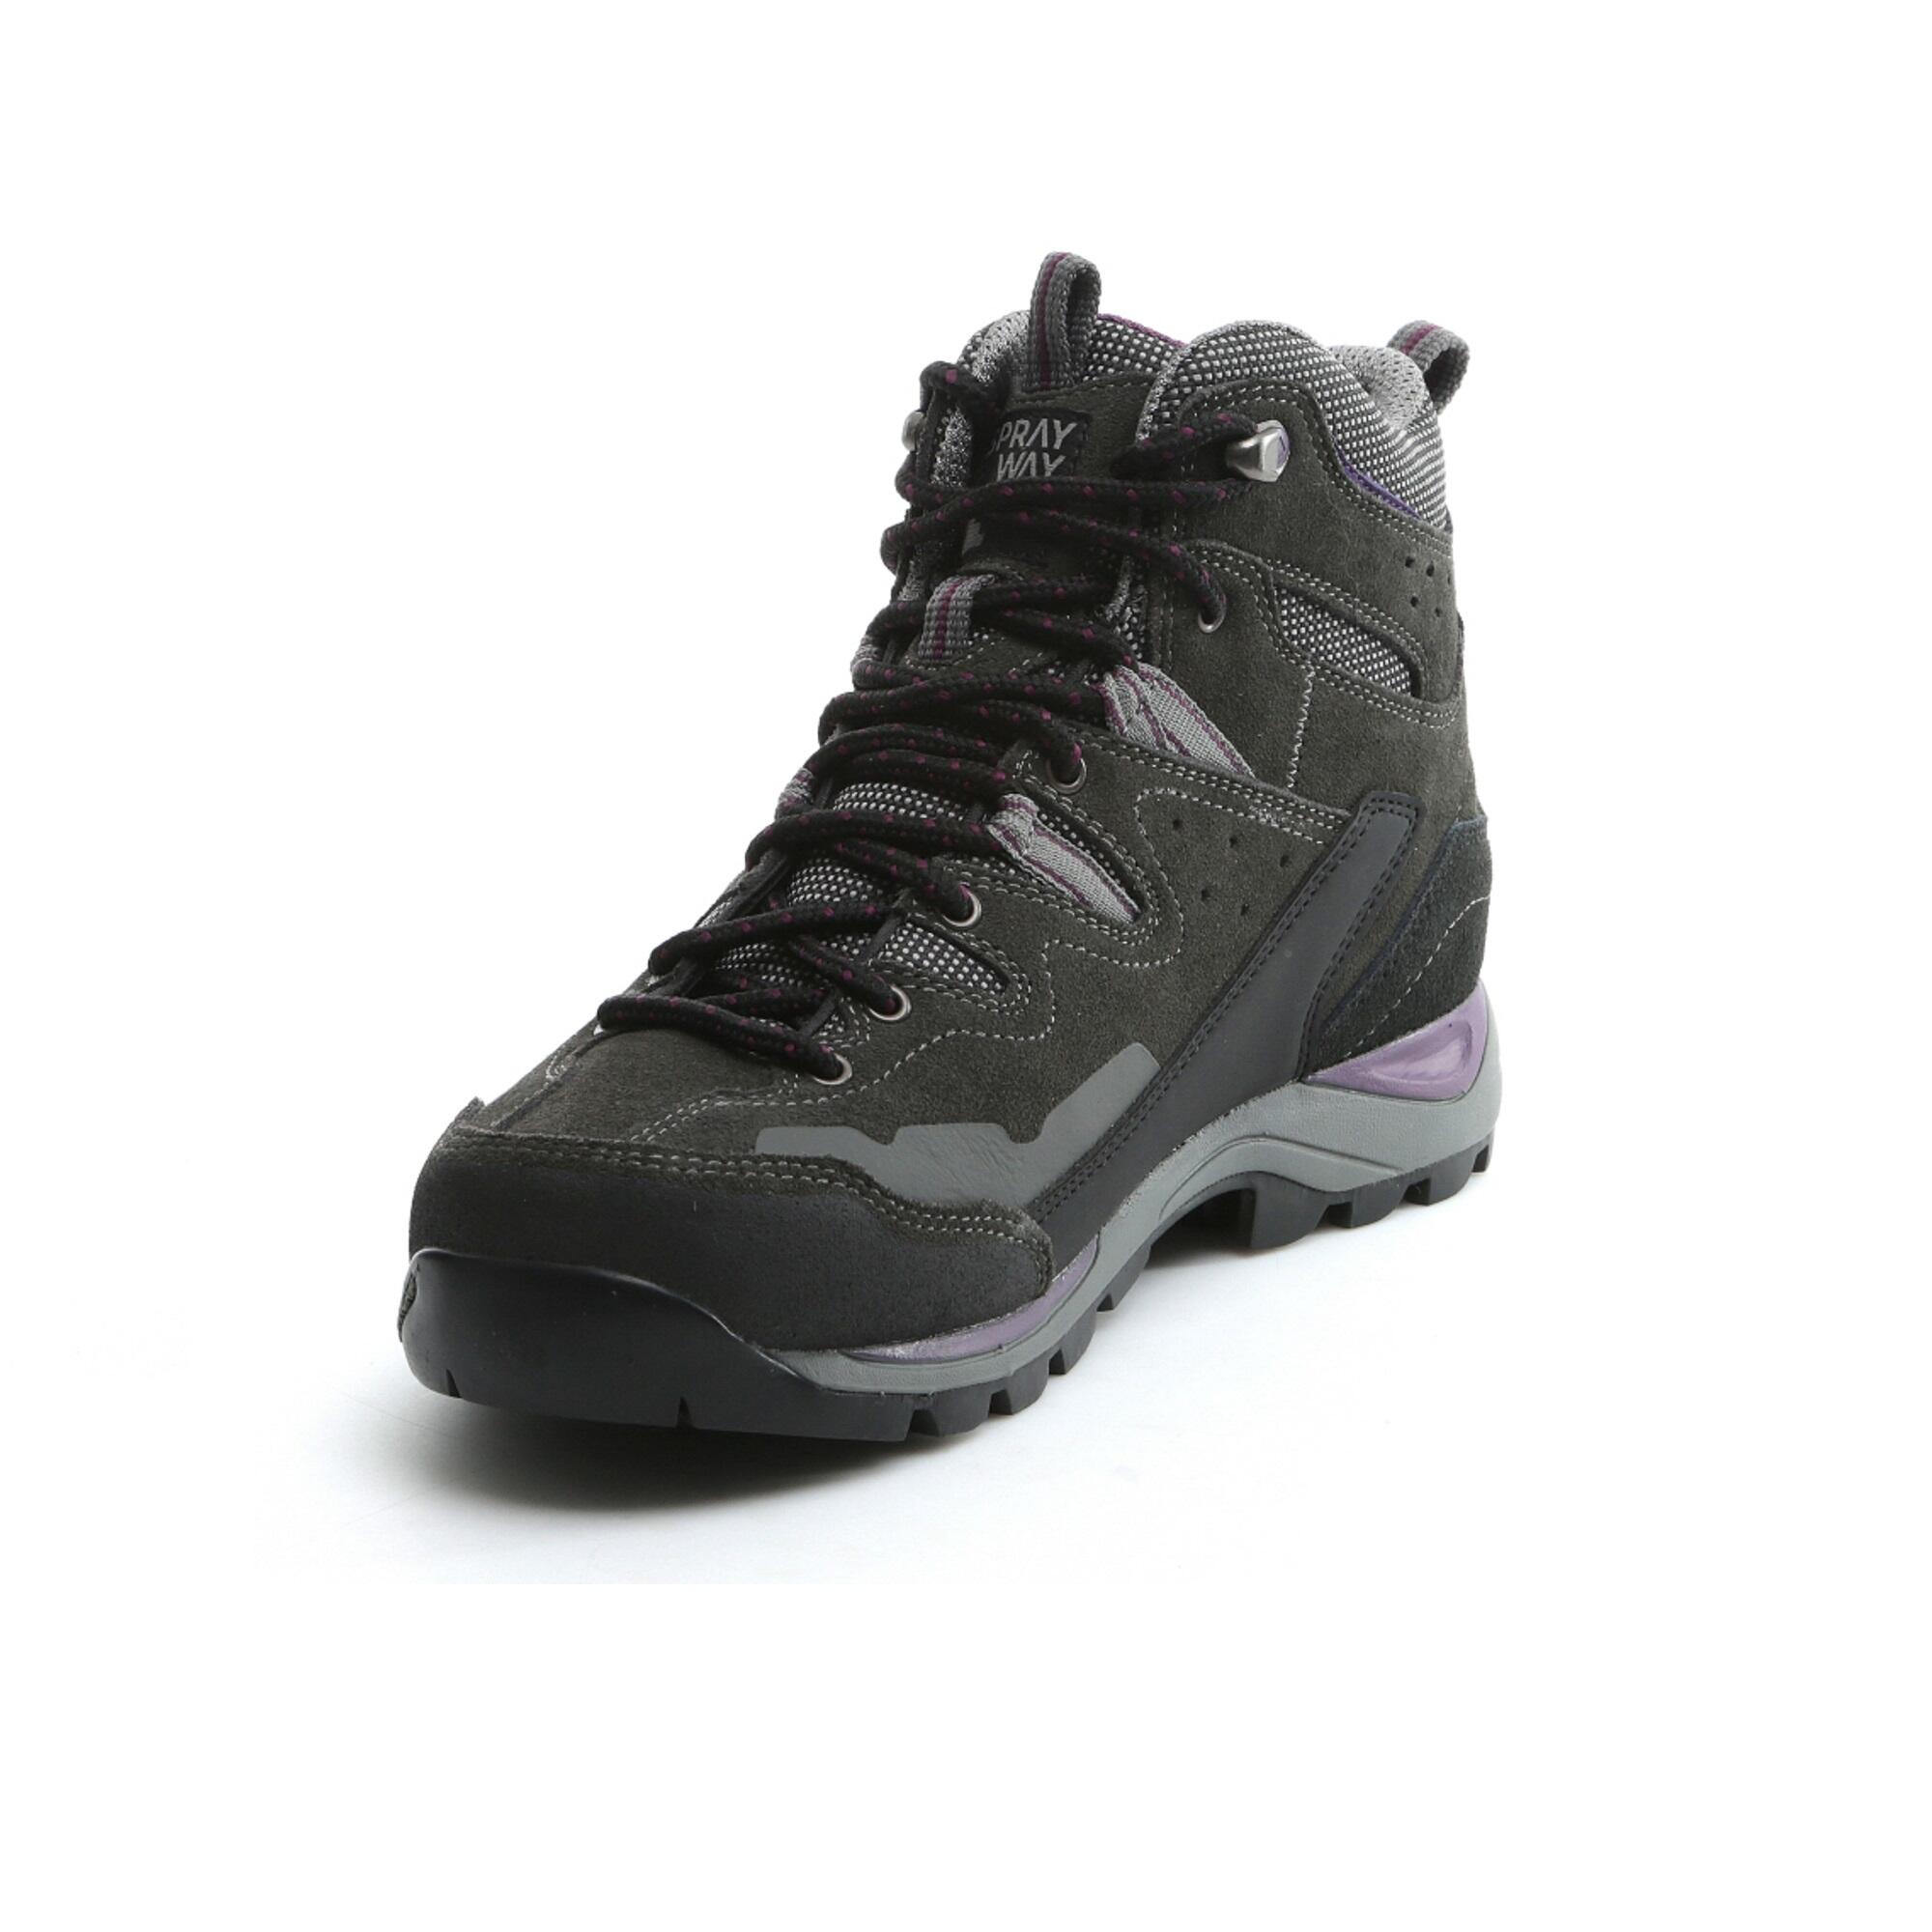 Womens waterproof leather boots - Sprayway Oxna Mid Charcoal/Purple 4/5